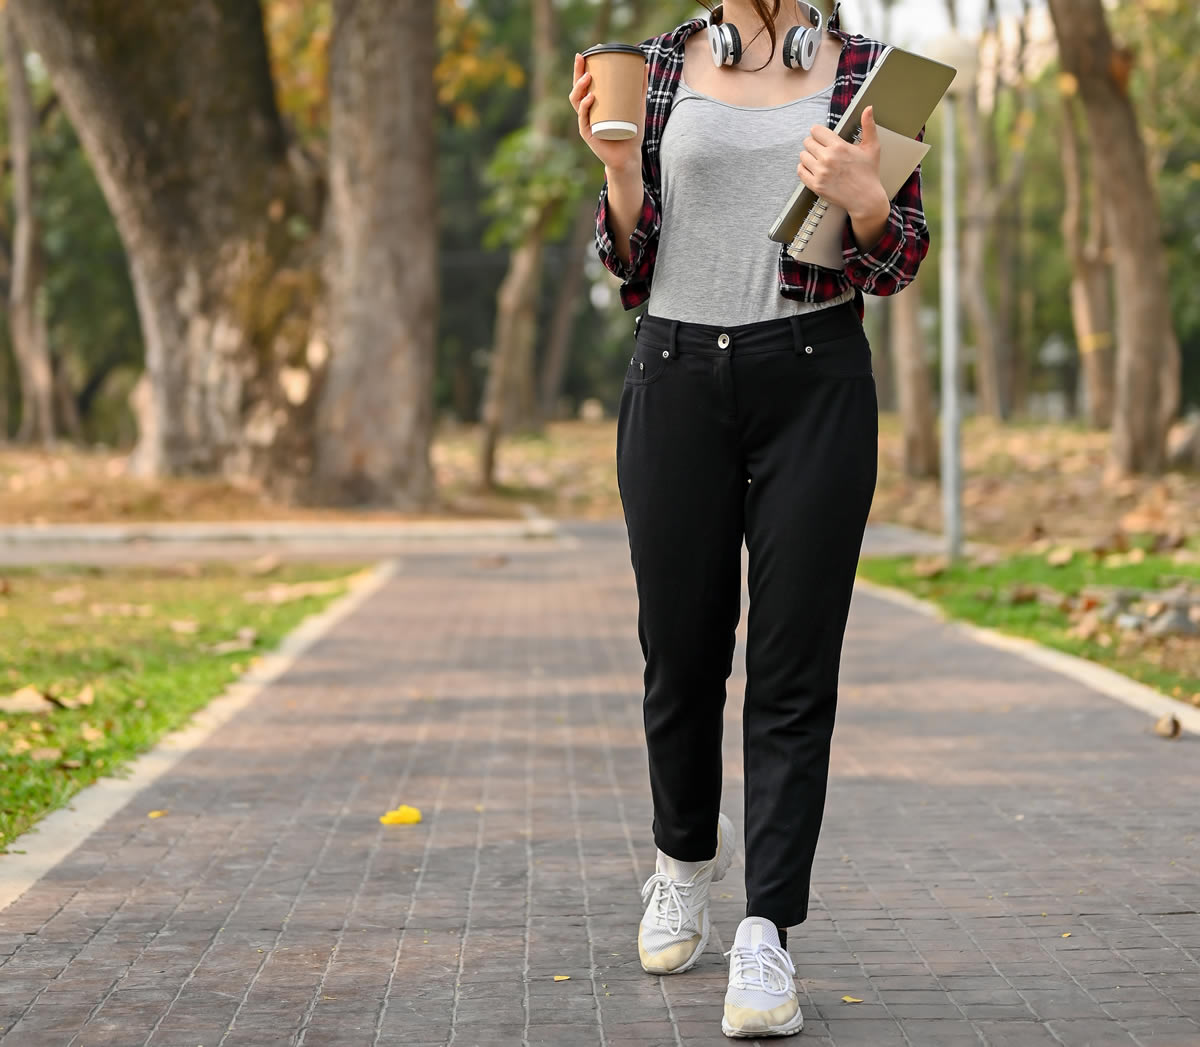 5 More Benefits of Walking That Might Surprise You